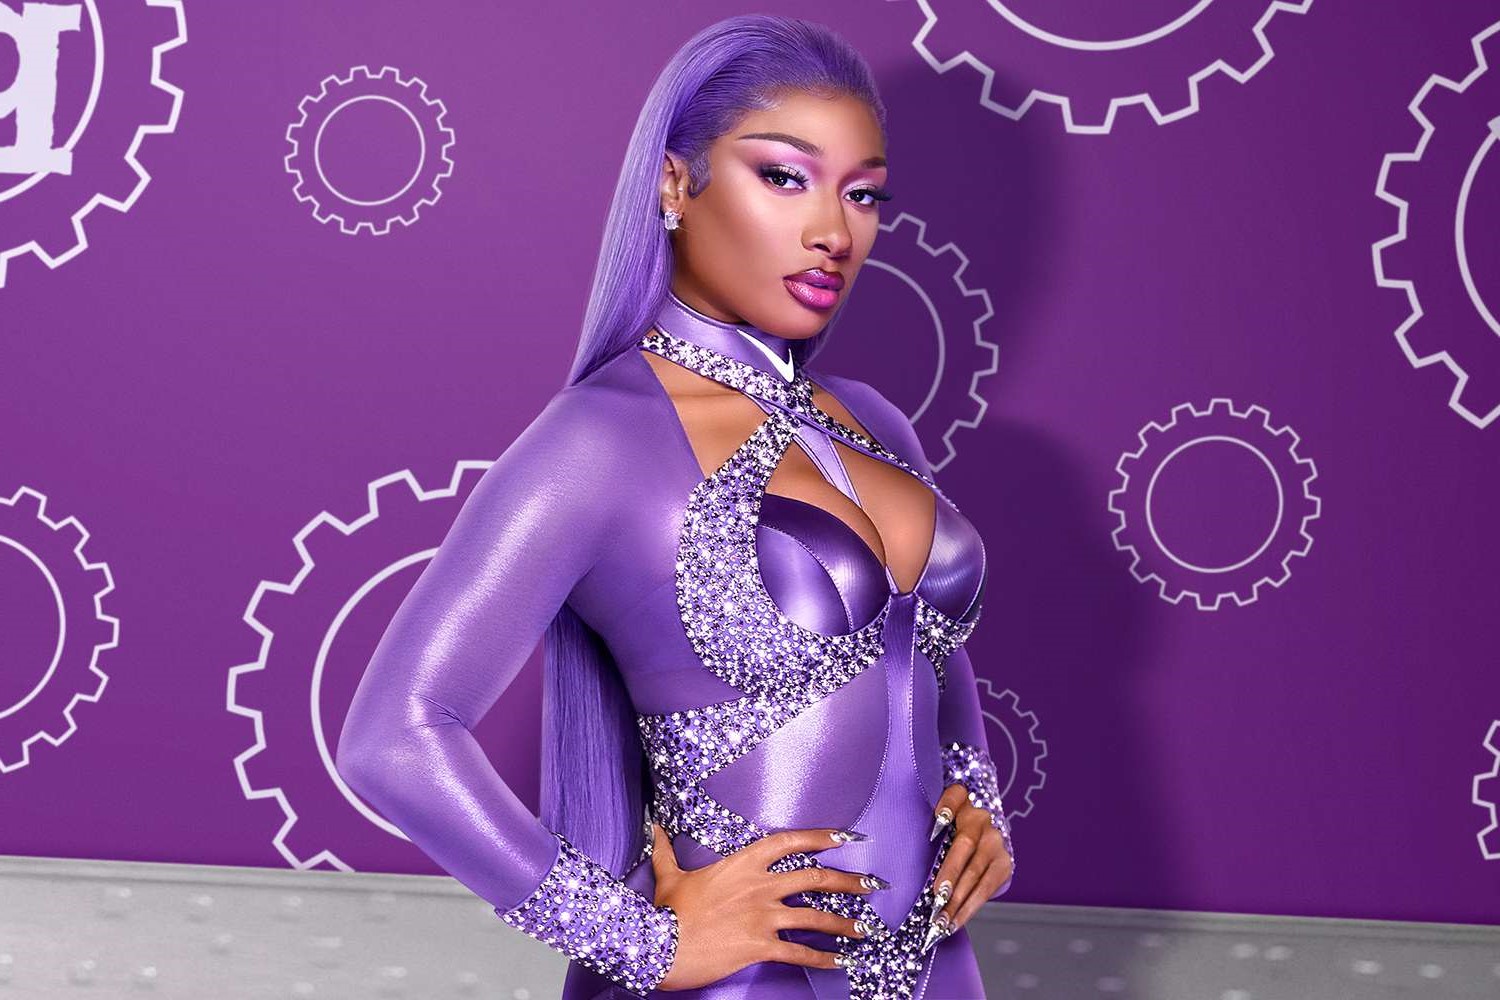 Megan Thee Stallion’s ‘Fire Crotch’ Line Removed From ‘Mean Girls’ Digital Release